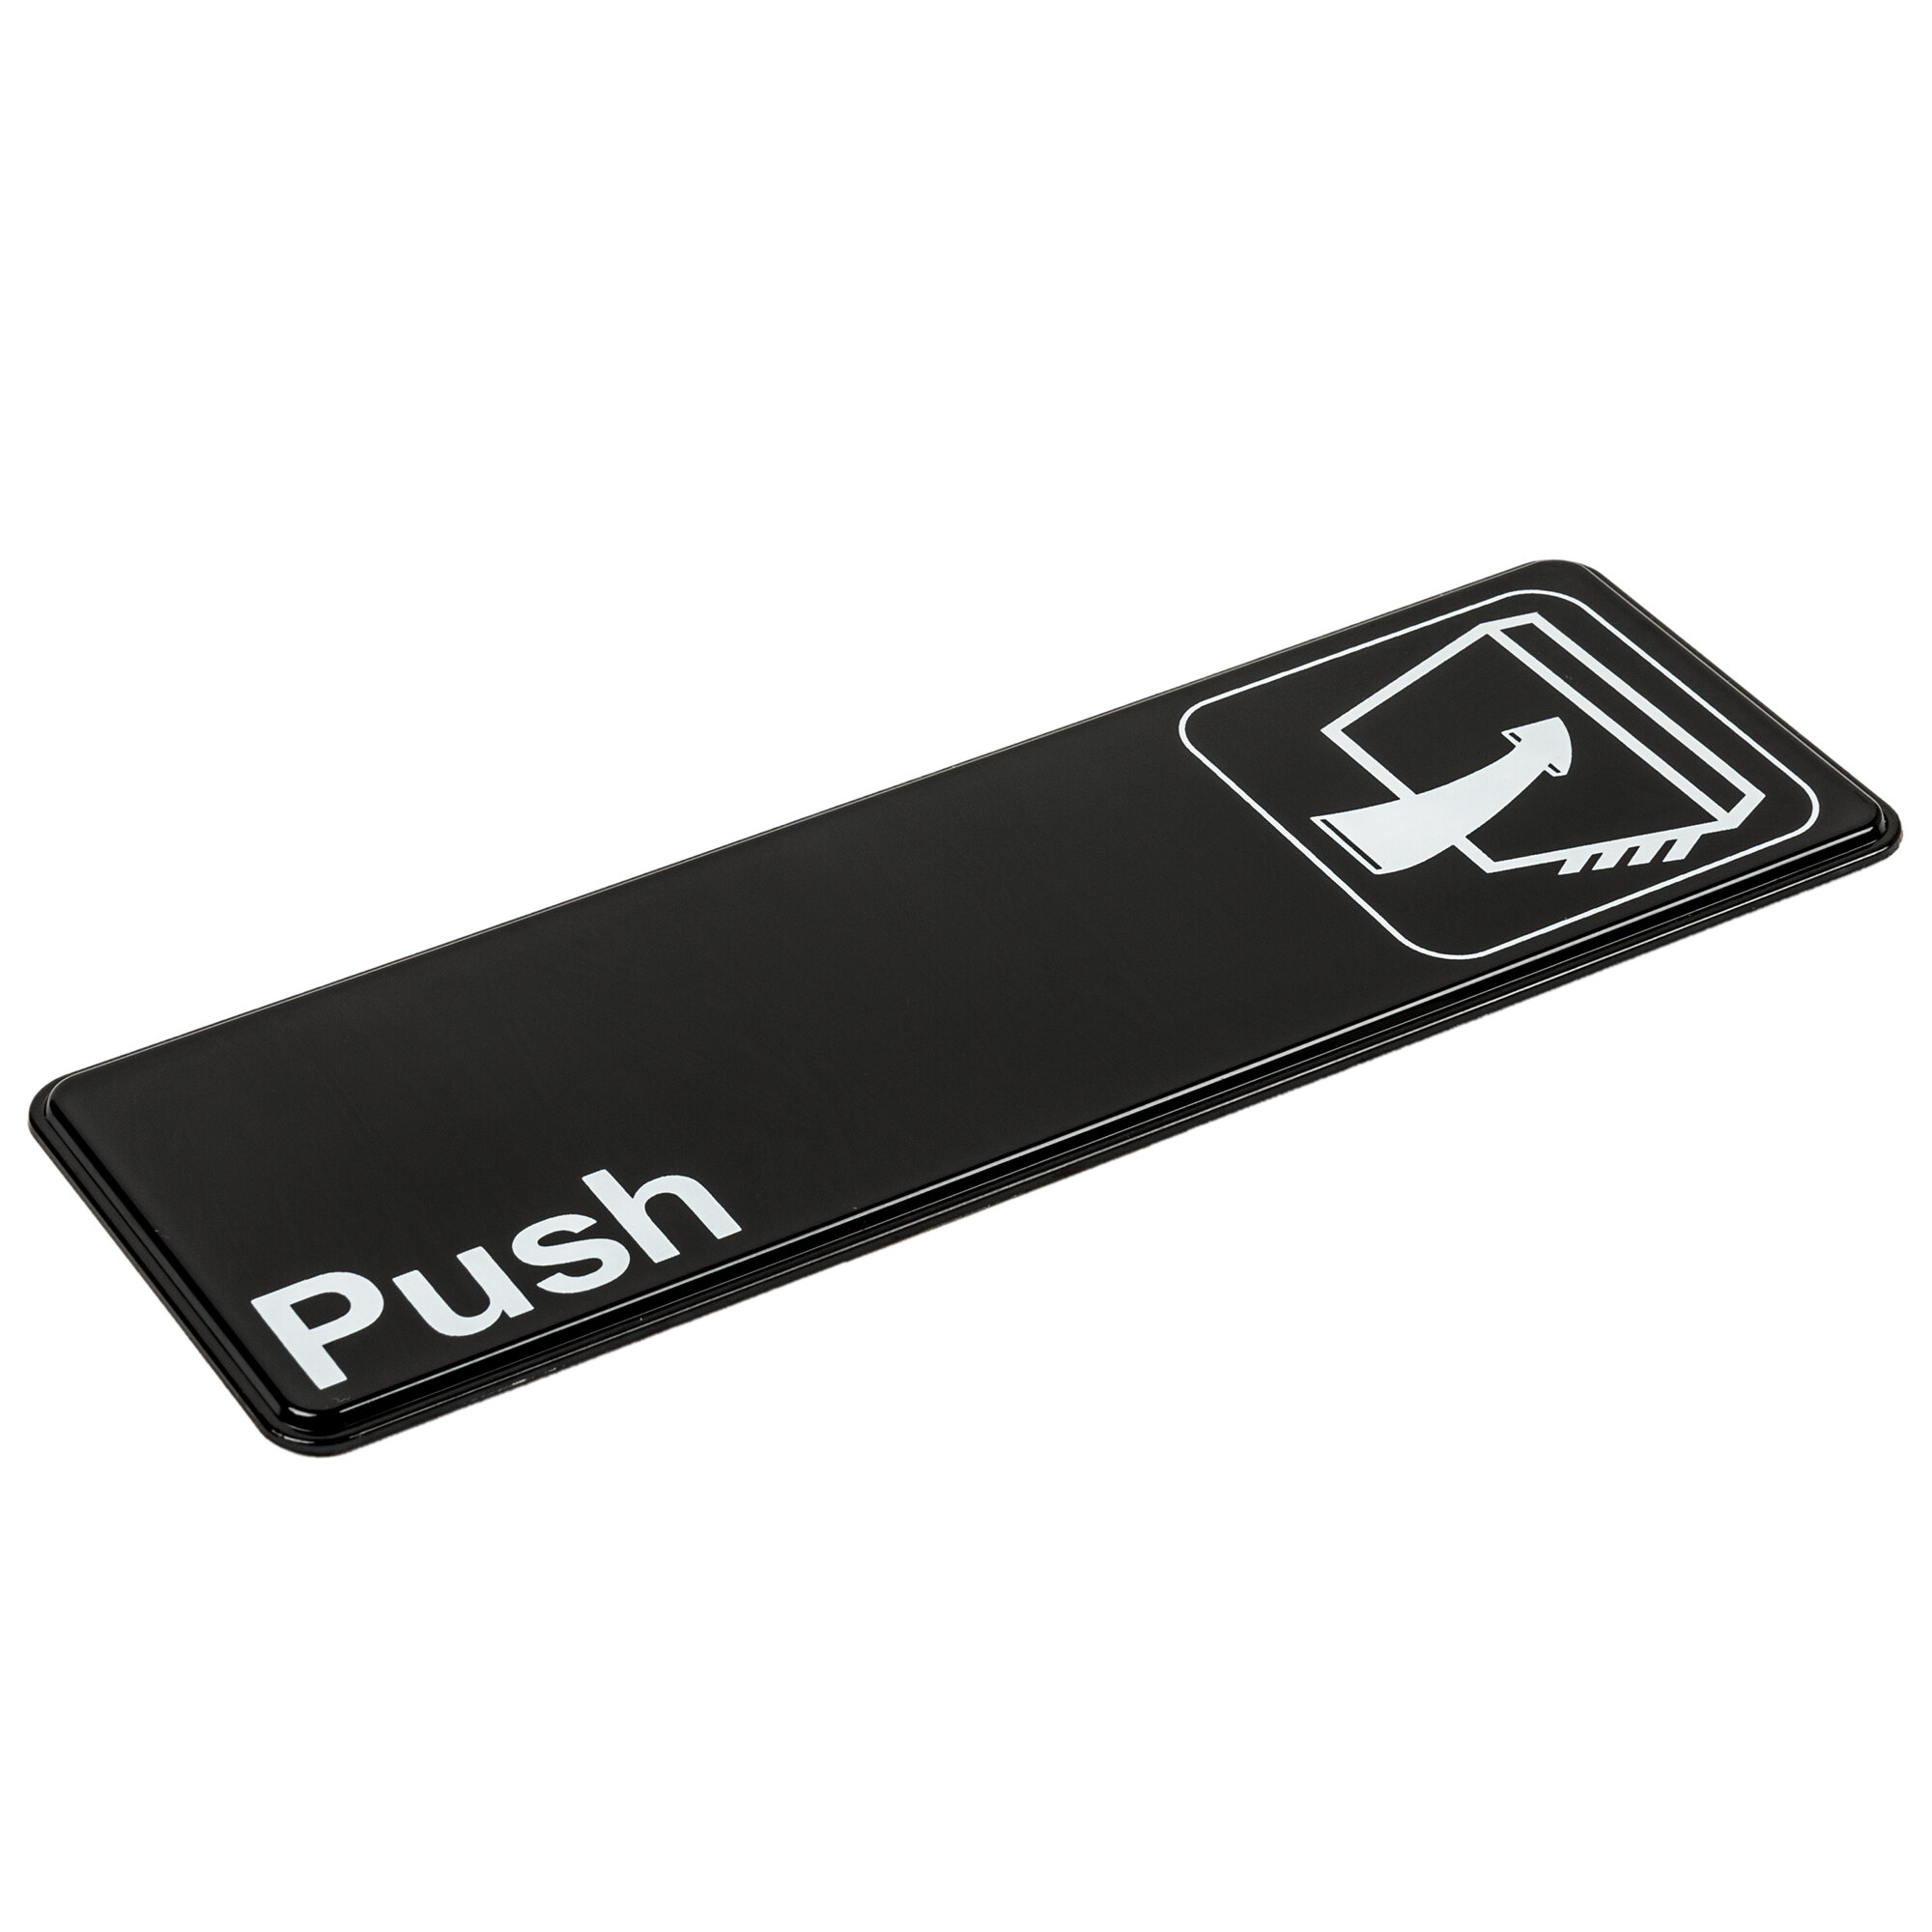 Push Sign - Black and White, 9